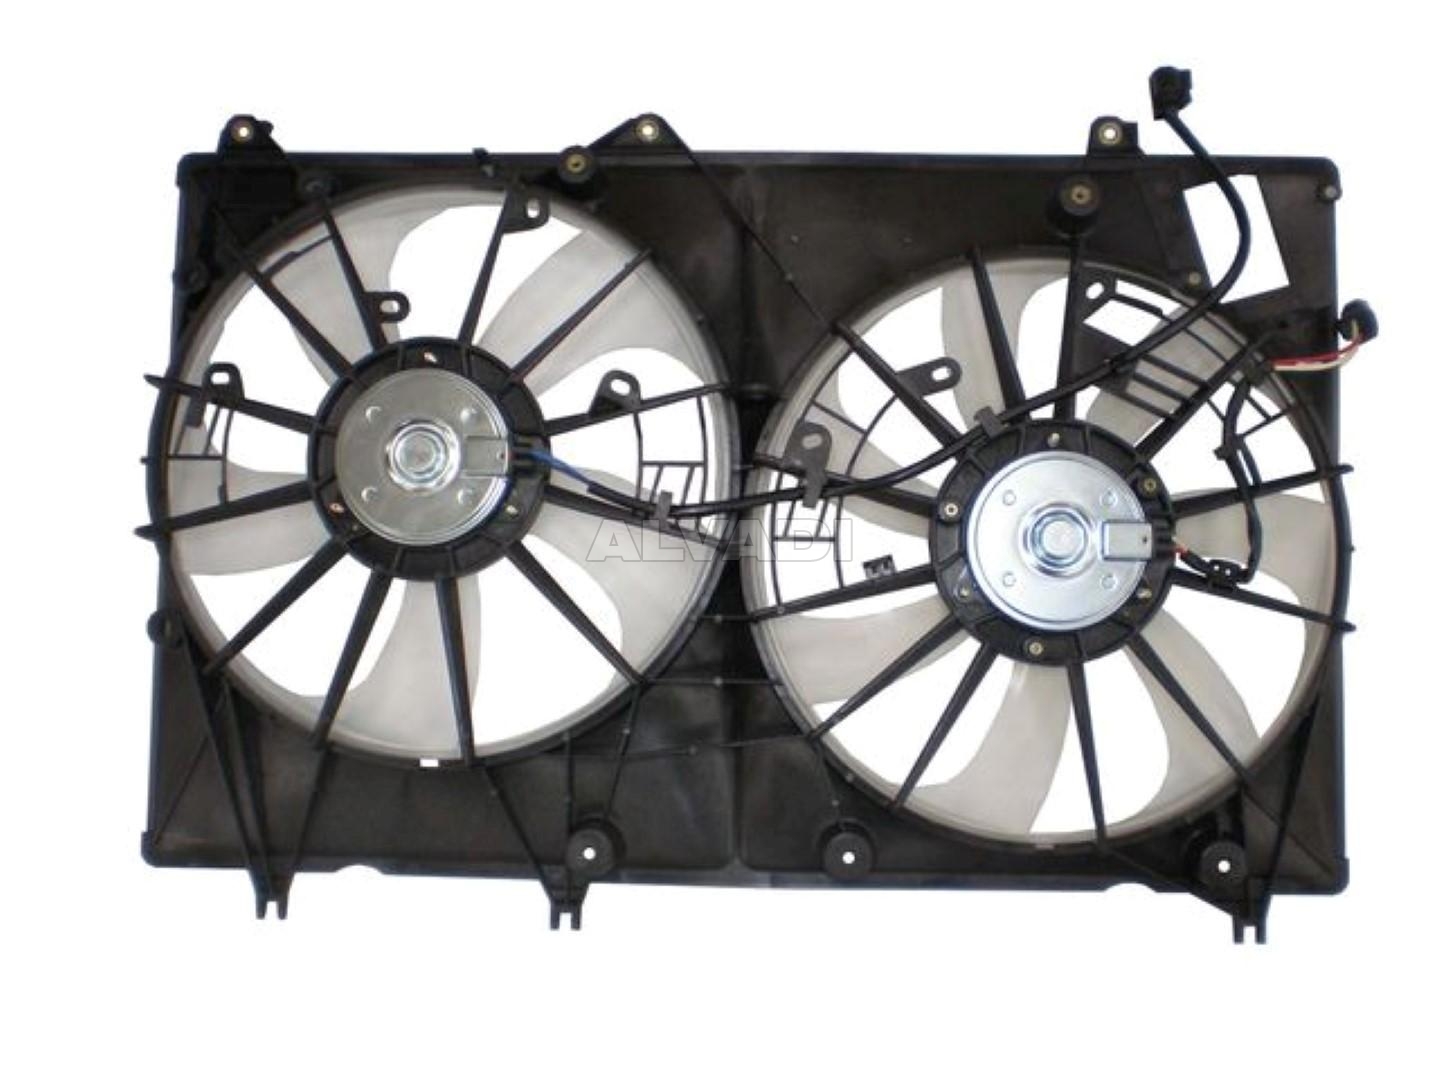 Tong Yang FAN-TY66029A Replacement Radiator/Condenser Cooling Fan Assembly 01-07 TY Lexs RX300/HIGHLANDER 01-07 FAN-TY66029A 